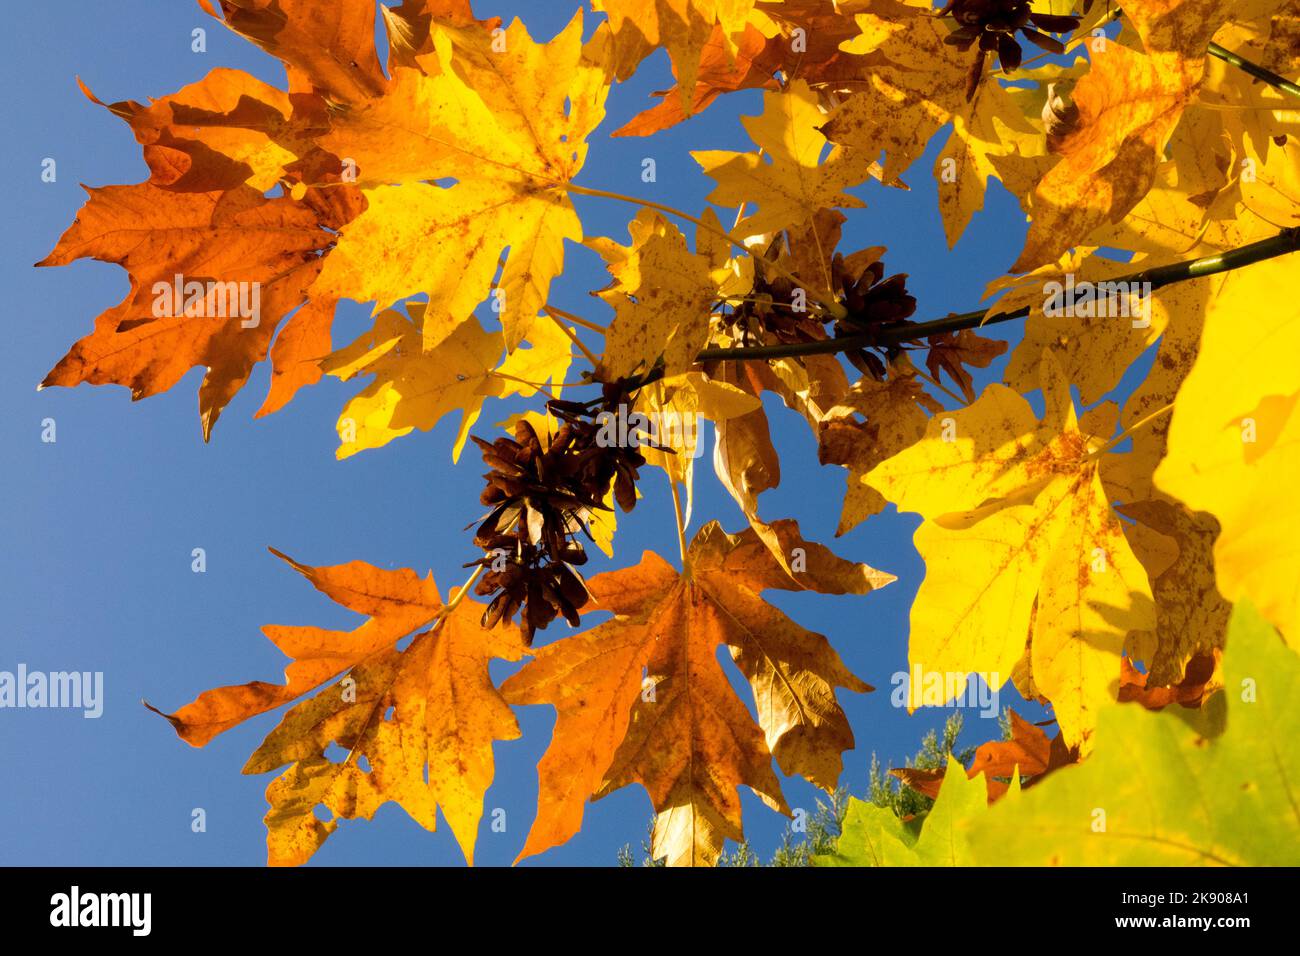 Bigleaf maple, Autumn, Acer macrophyllum, Leaves, Yellow against blue sky Fall color Stock Photo